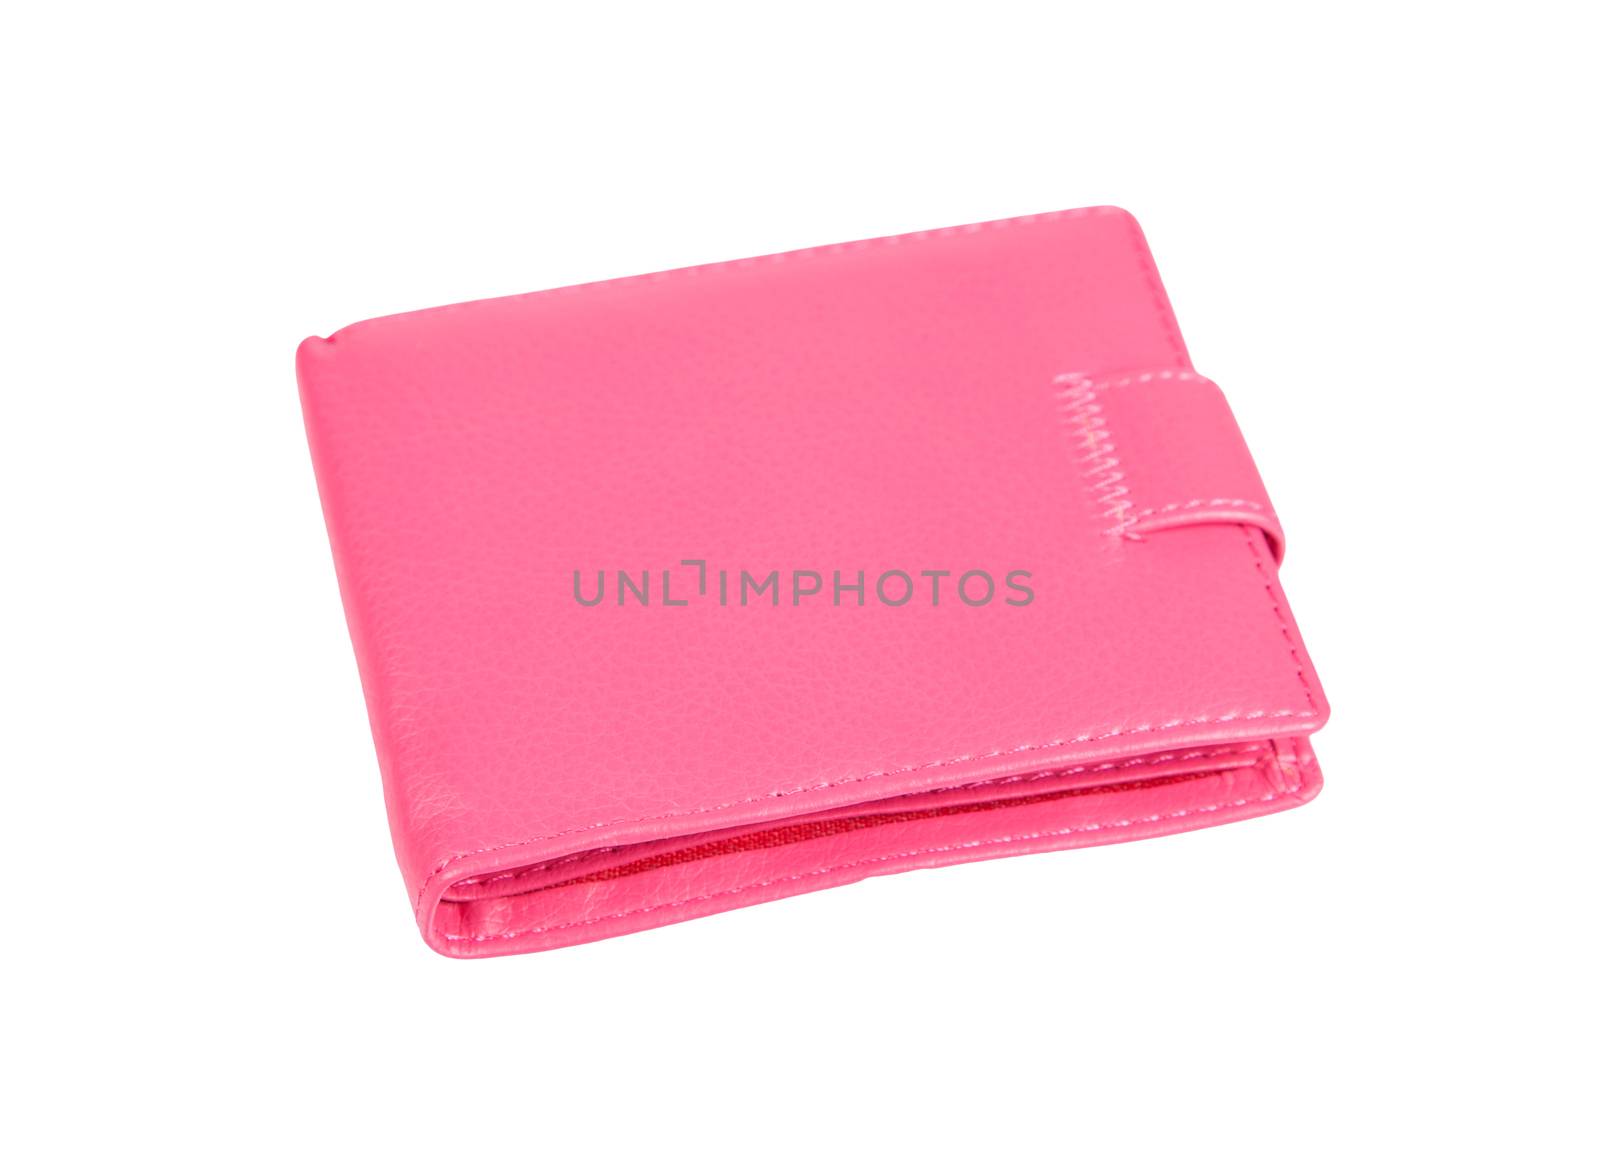 Pink purse isolated on white background